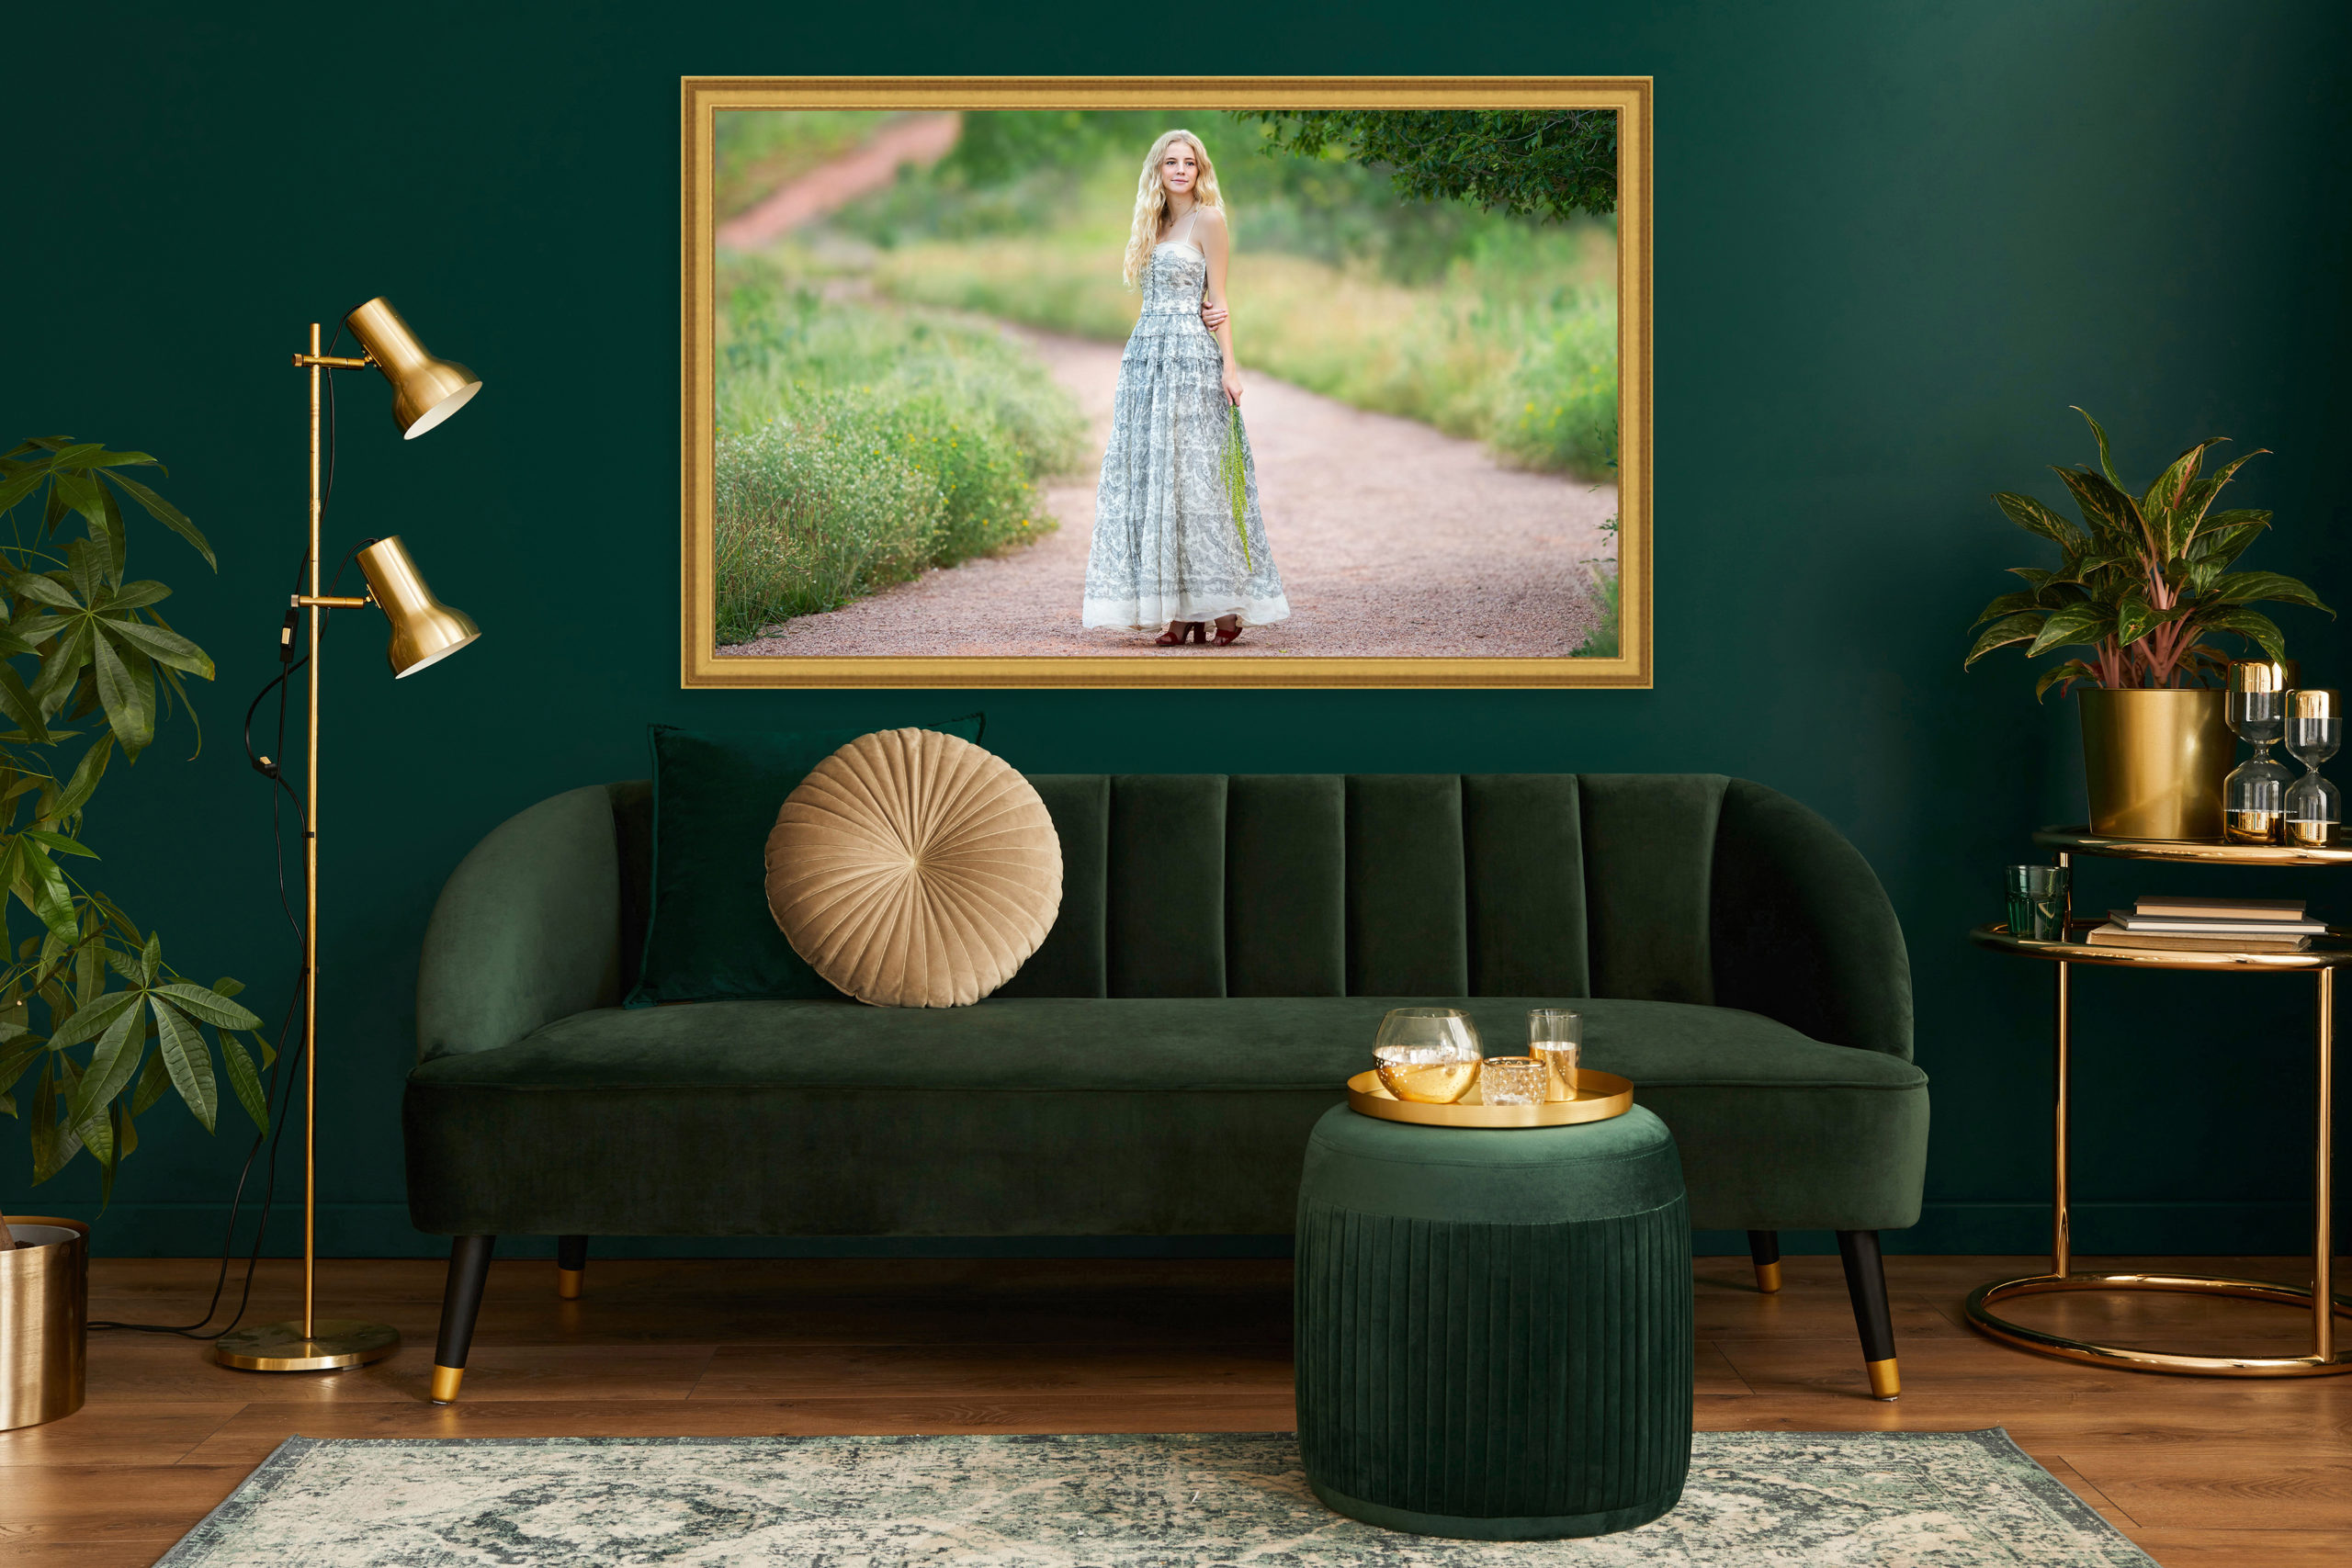 Luxury living room in house with modern interior design, green velvet sofa, coffee table, pouf, gold decoration, plant, lamp, carpet, mock up poster frame and elegant accessories. Colorado Springs Senior Modern Portraits .